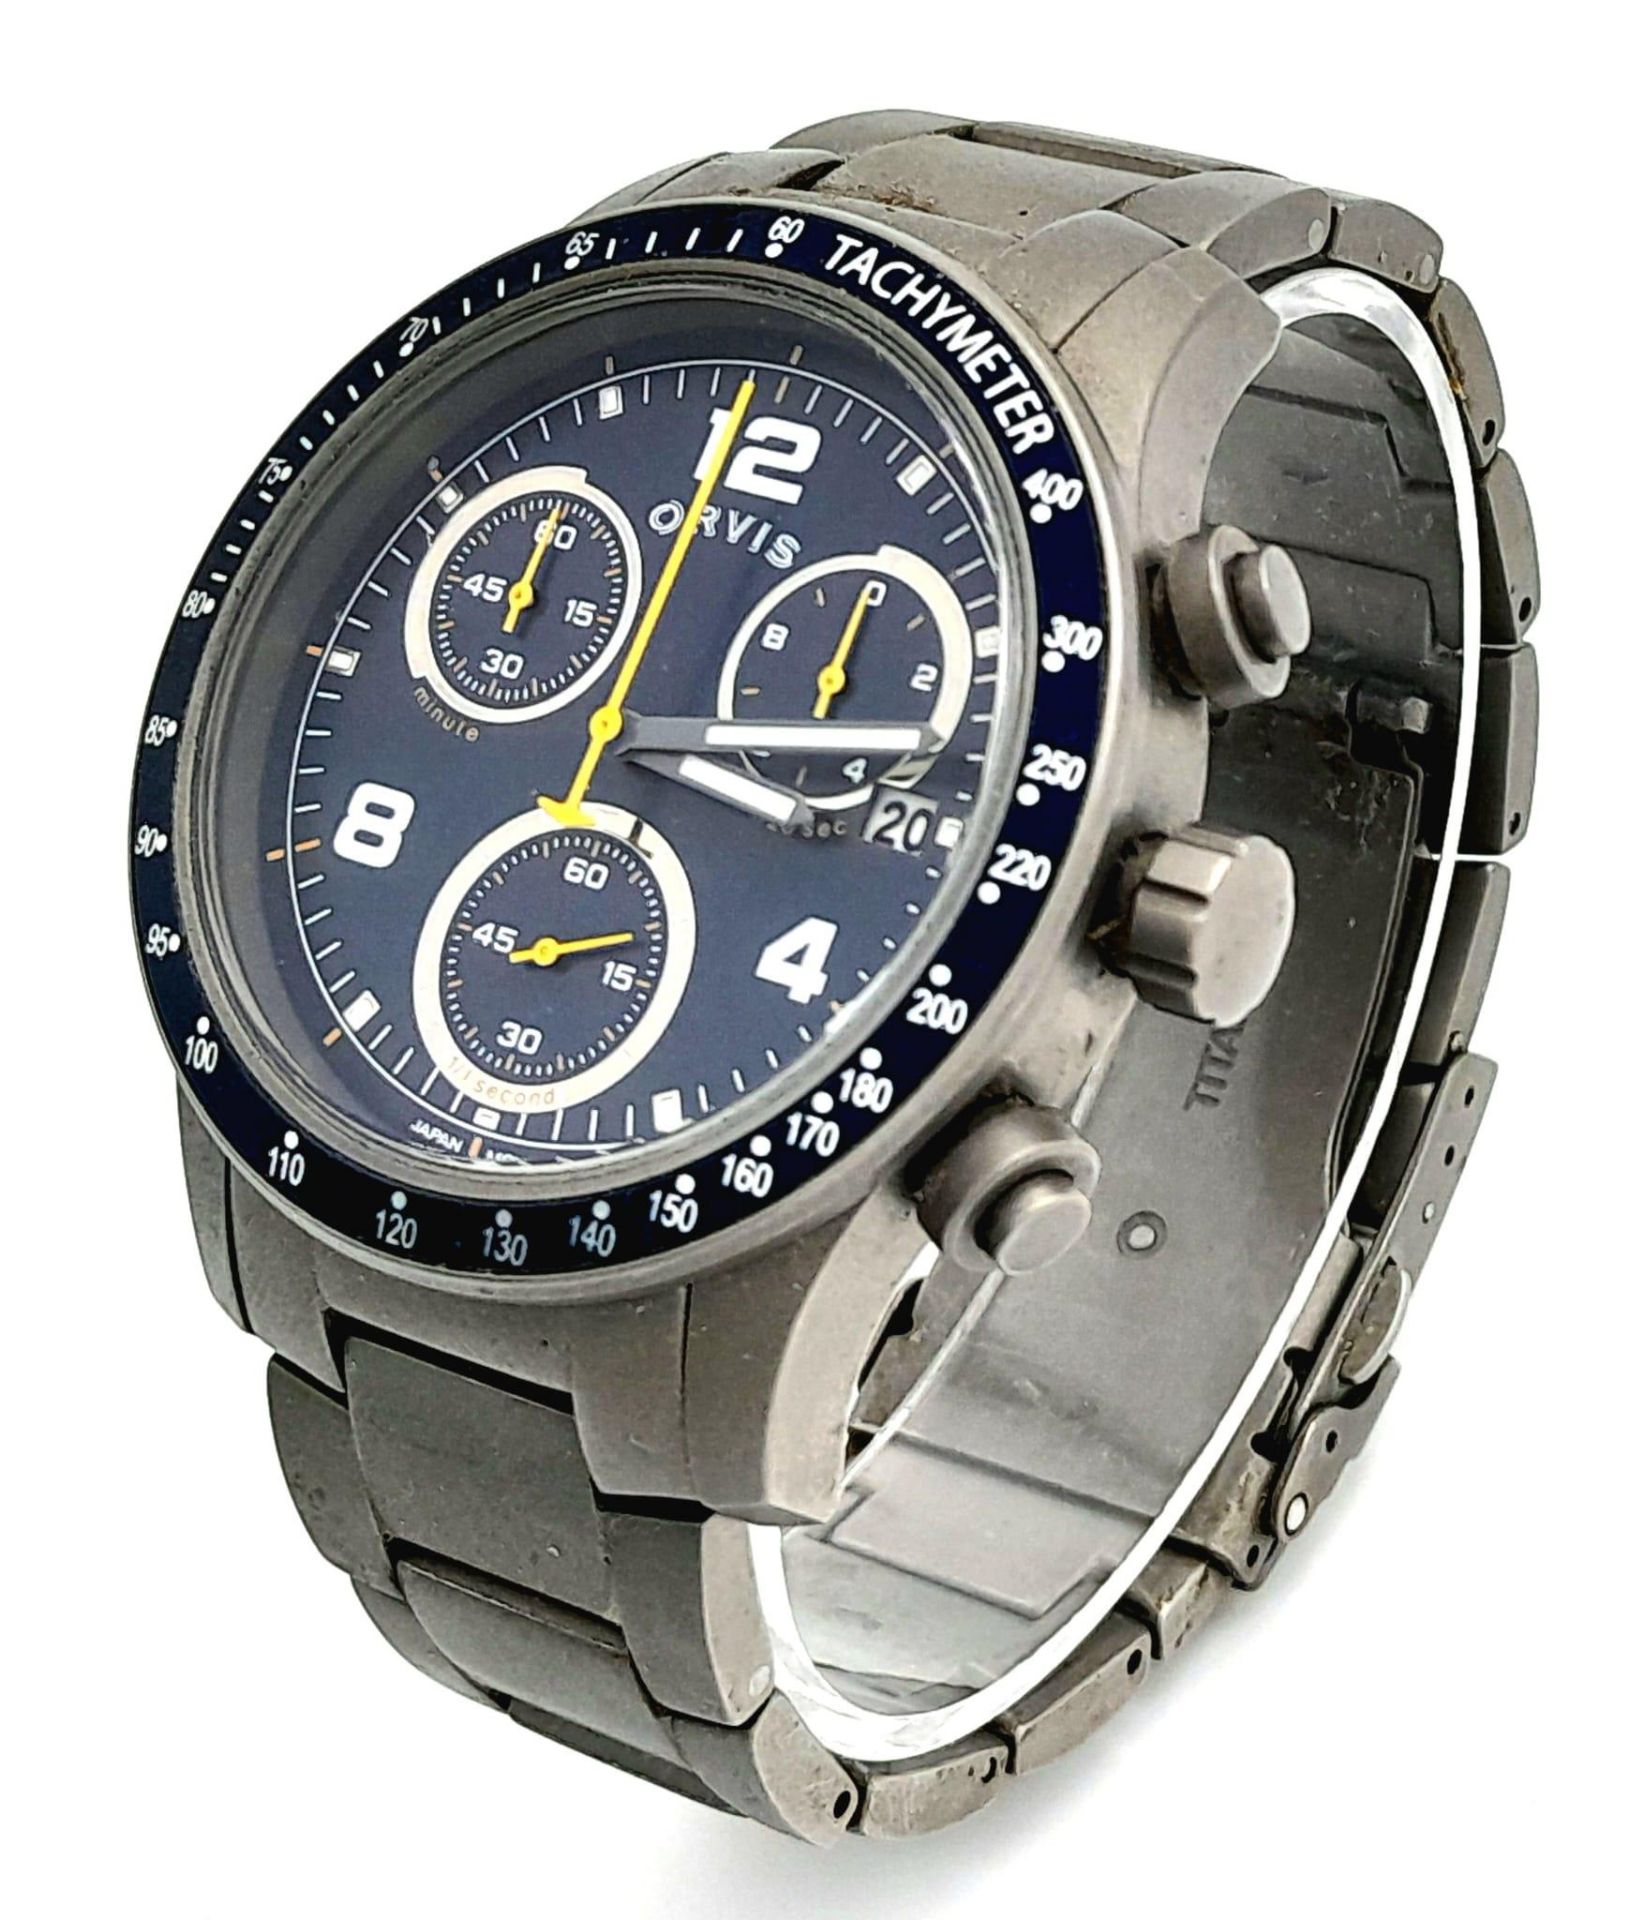 An Orvis Titanium Chronograph Gents Watch. Titanium bracelet and case - 43mm. Blue dial with three